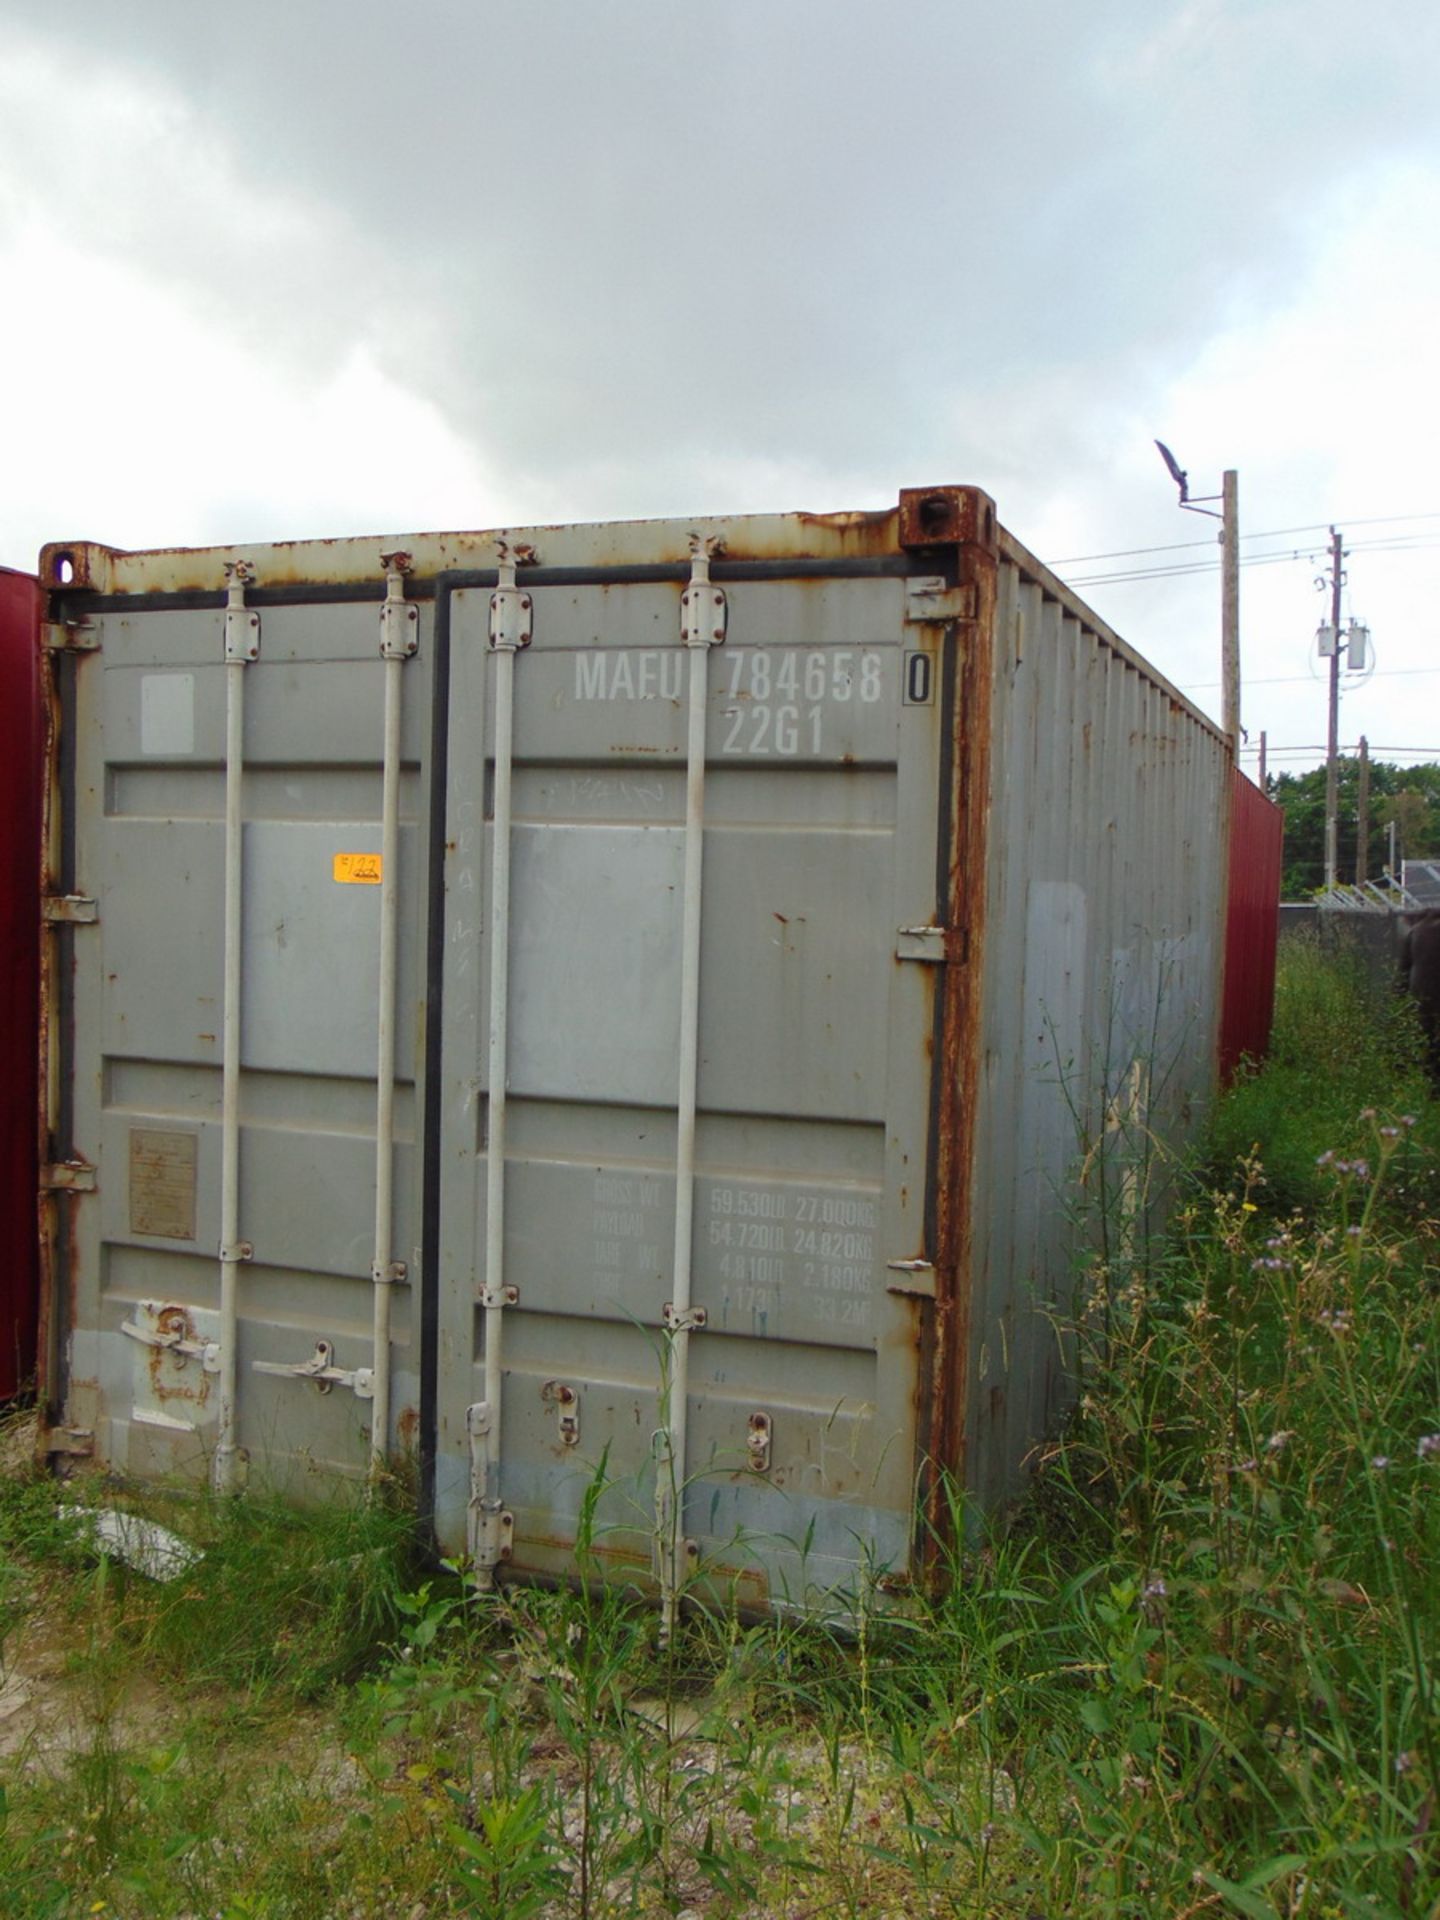 Bedroom Accommodation Container 20' X 8', w/ Frigidaire AC Unit - Image 2 of 5